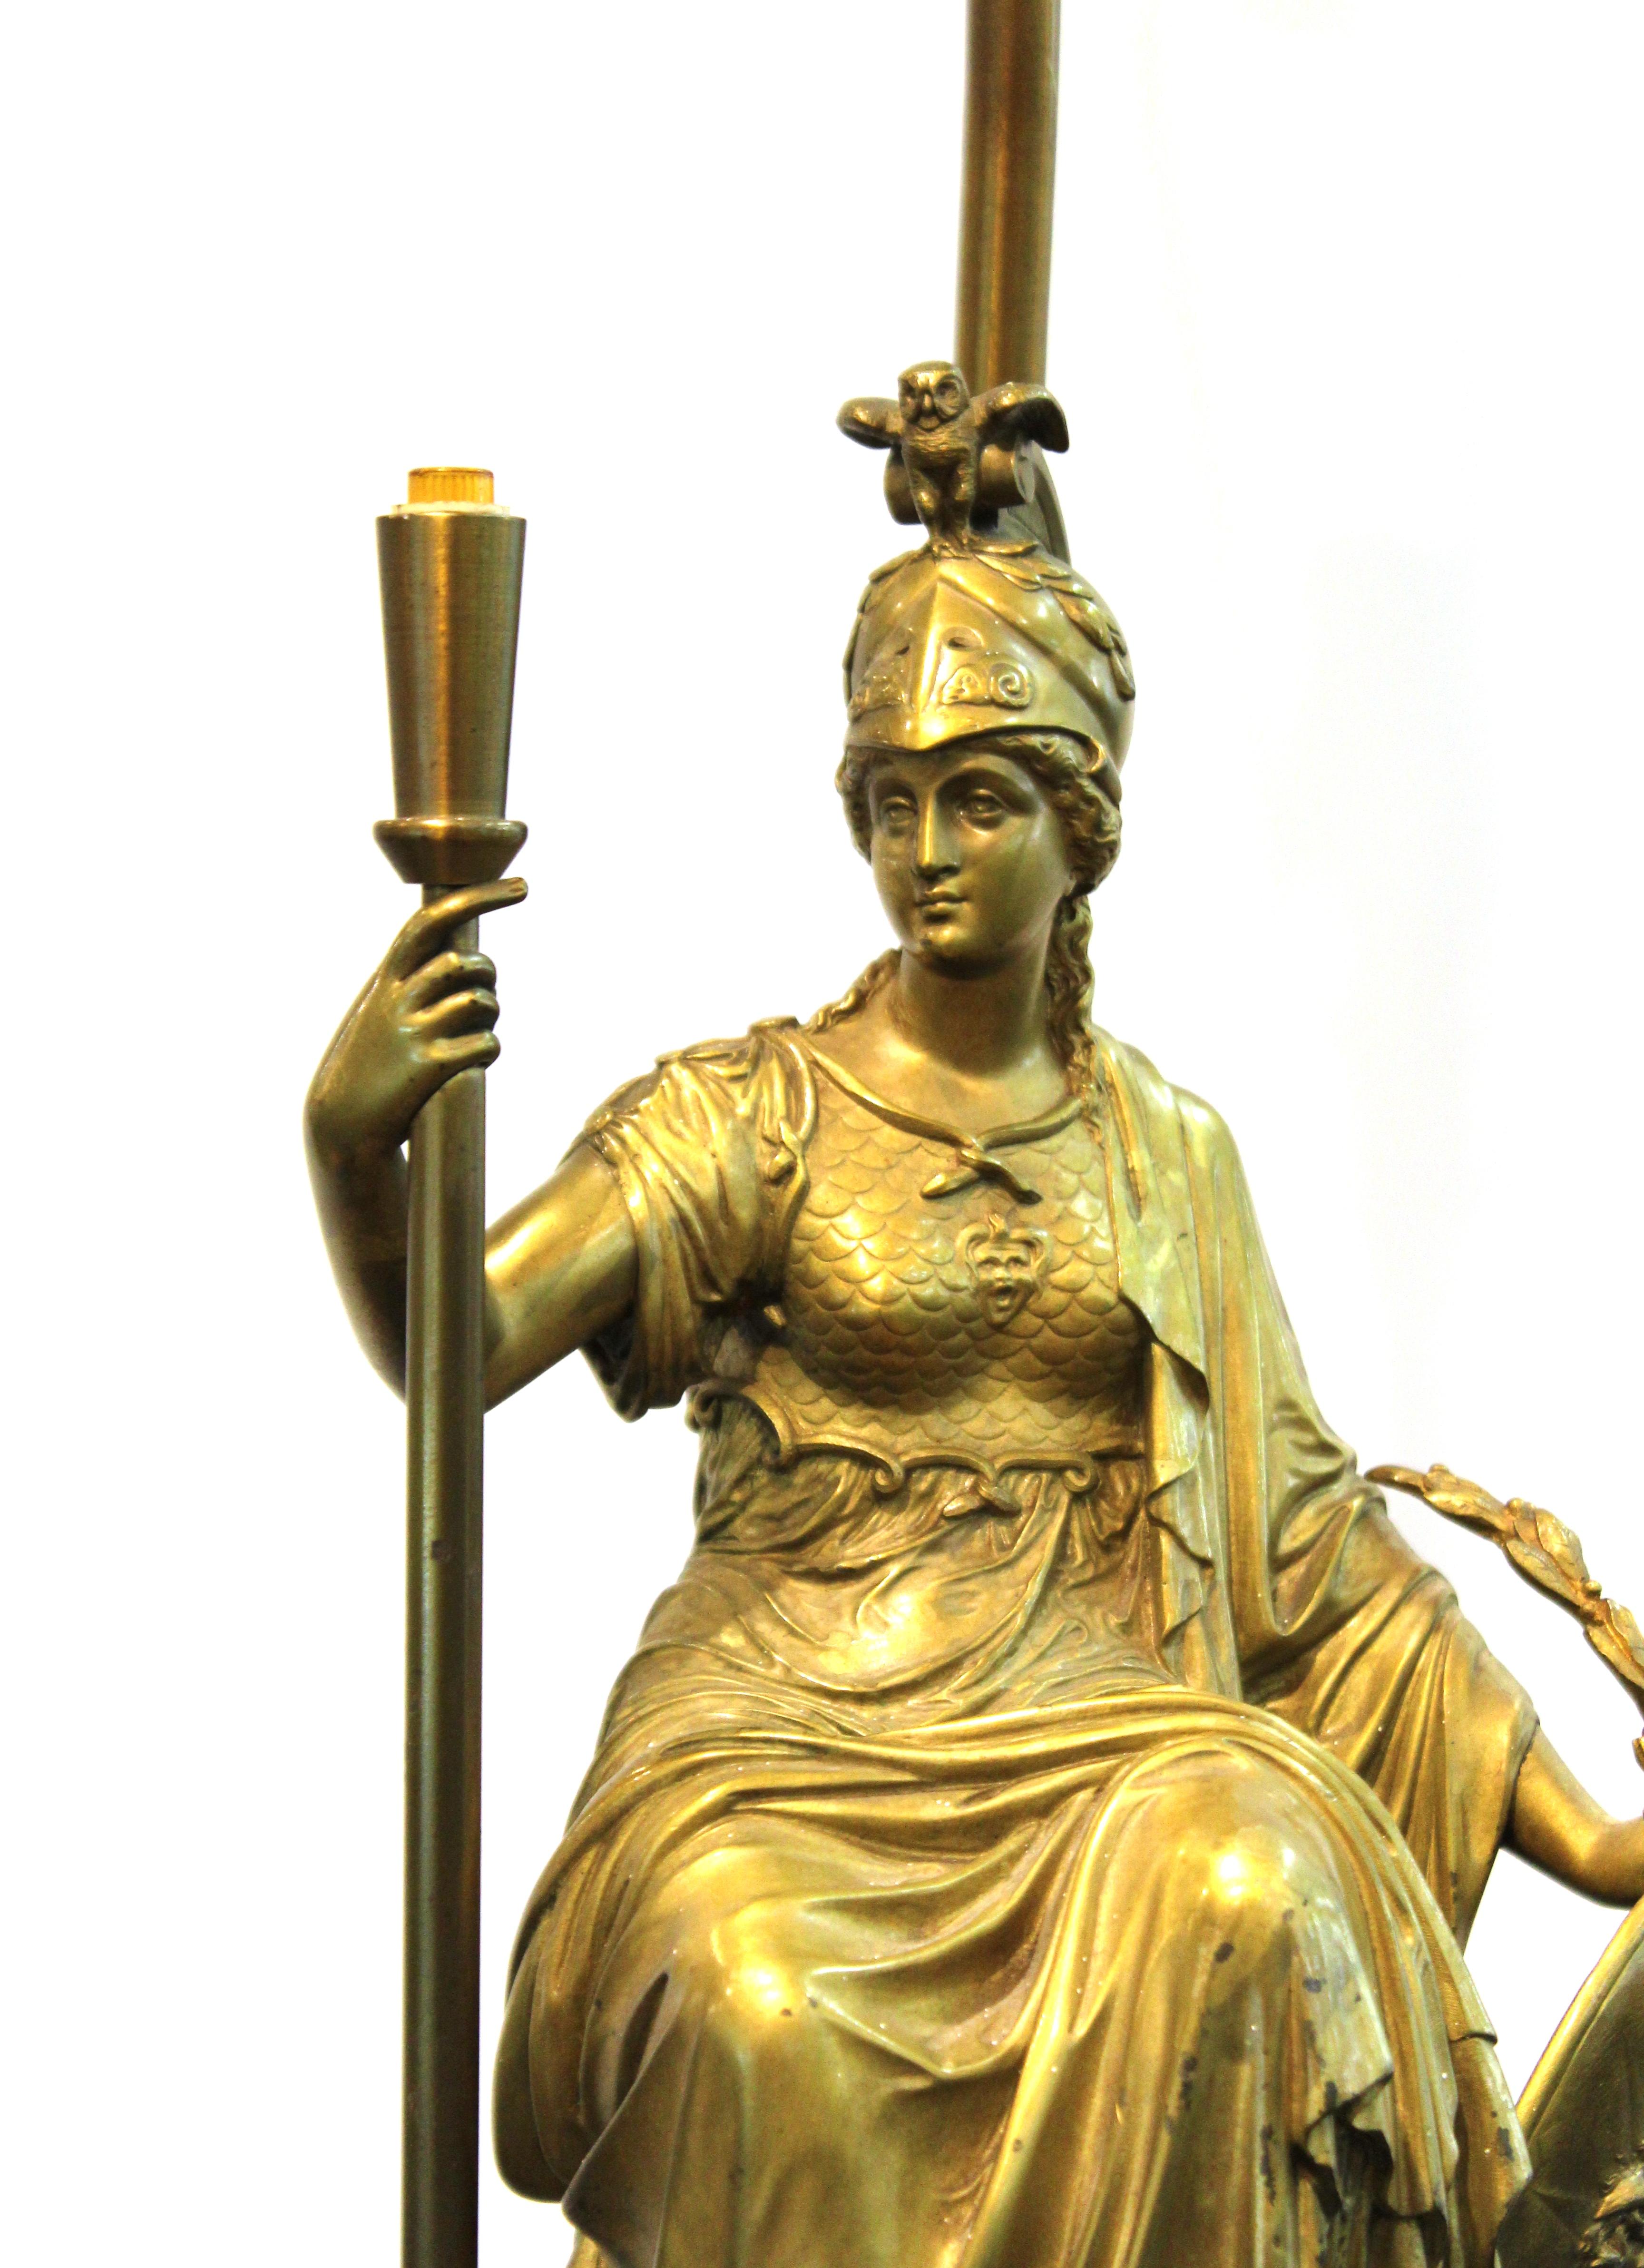 19th Century French Neoclassical Revival Style Table Lamp With Seated Bronze Athena Sculpture